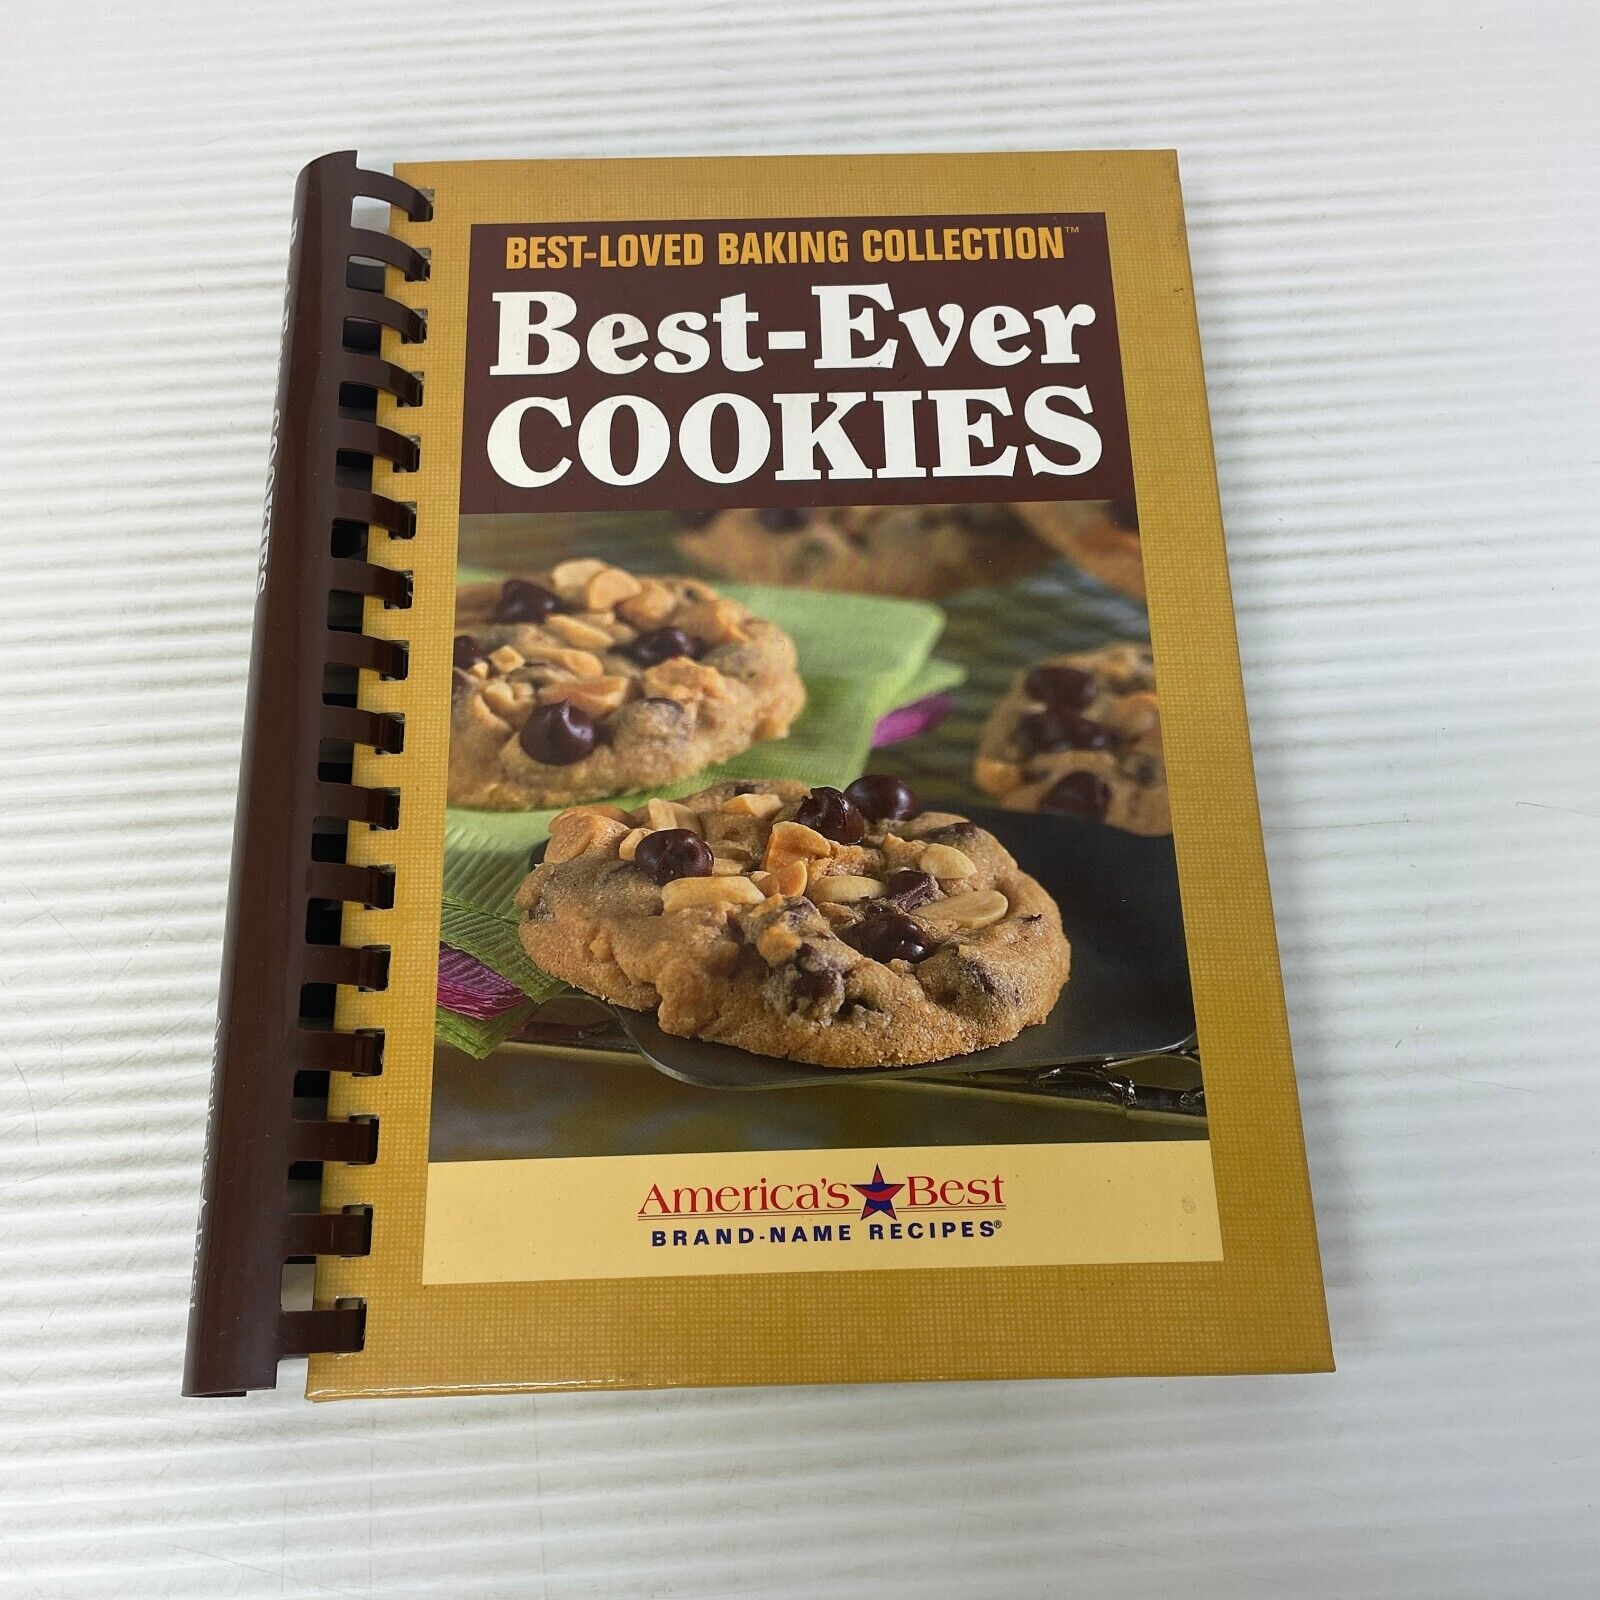 Primary image for Best Ever Cookies Cookbook Hardcover Book America's Best Brand Name Recipes 2004